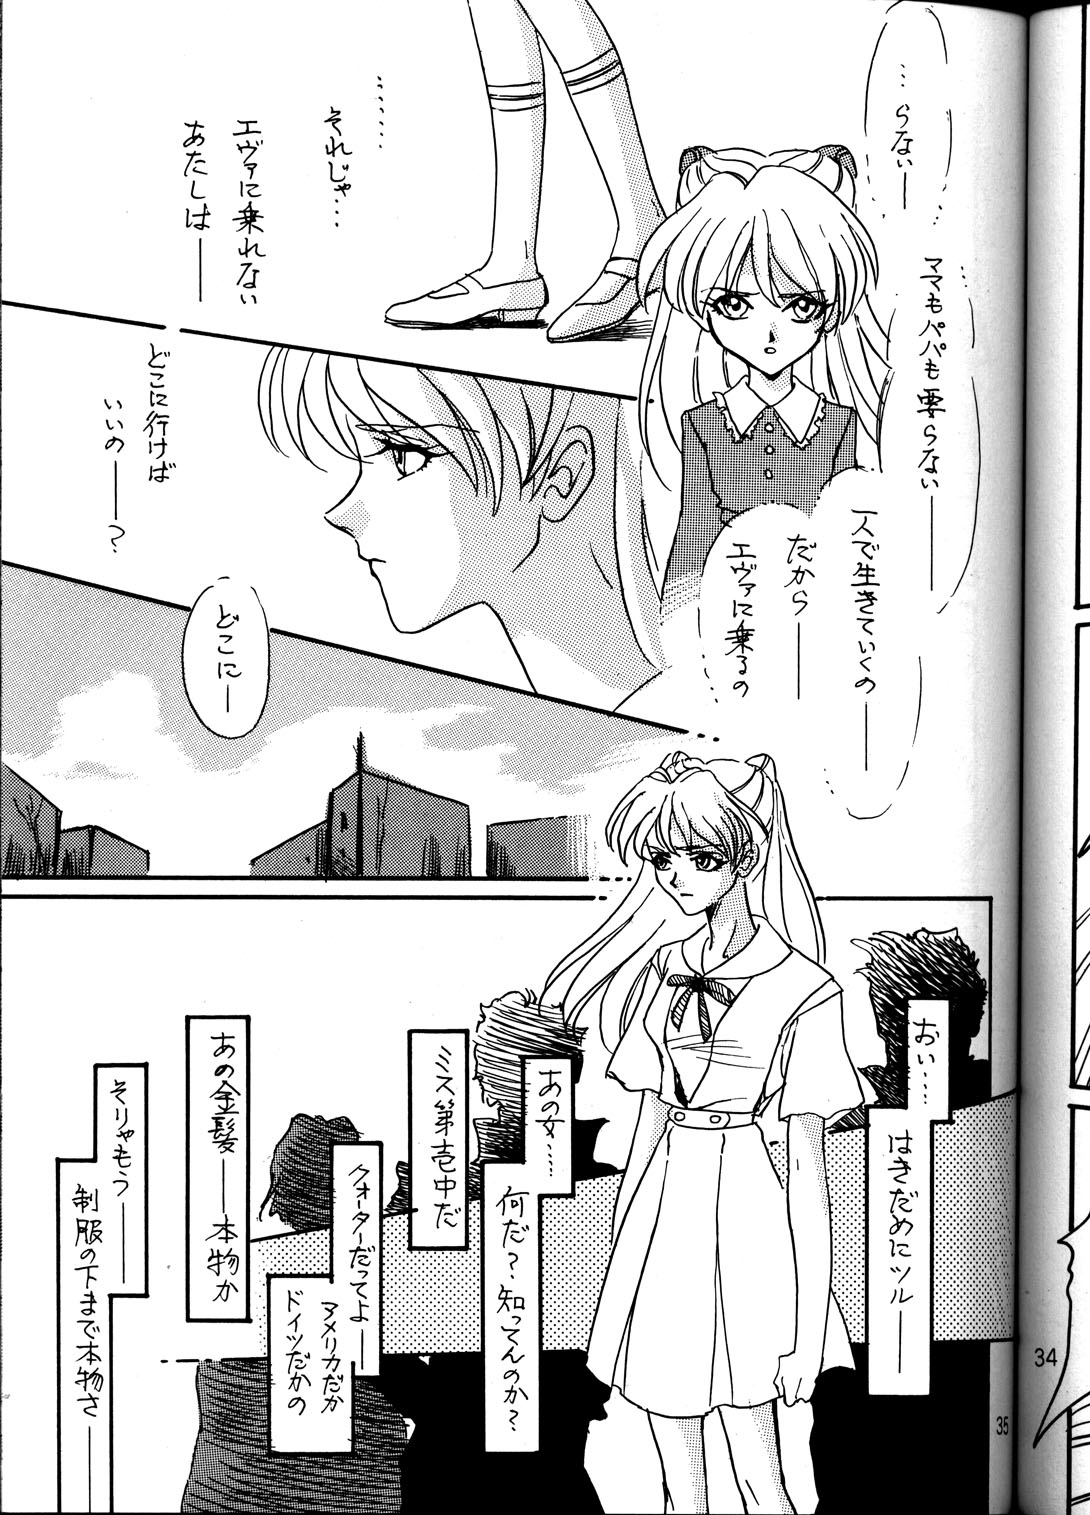 [Nabarl Doumei] Lonely Moon (Evangelion) page 34 full